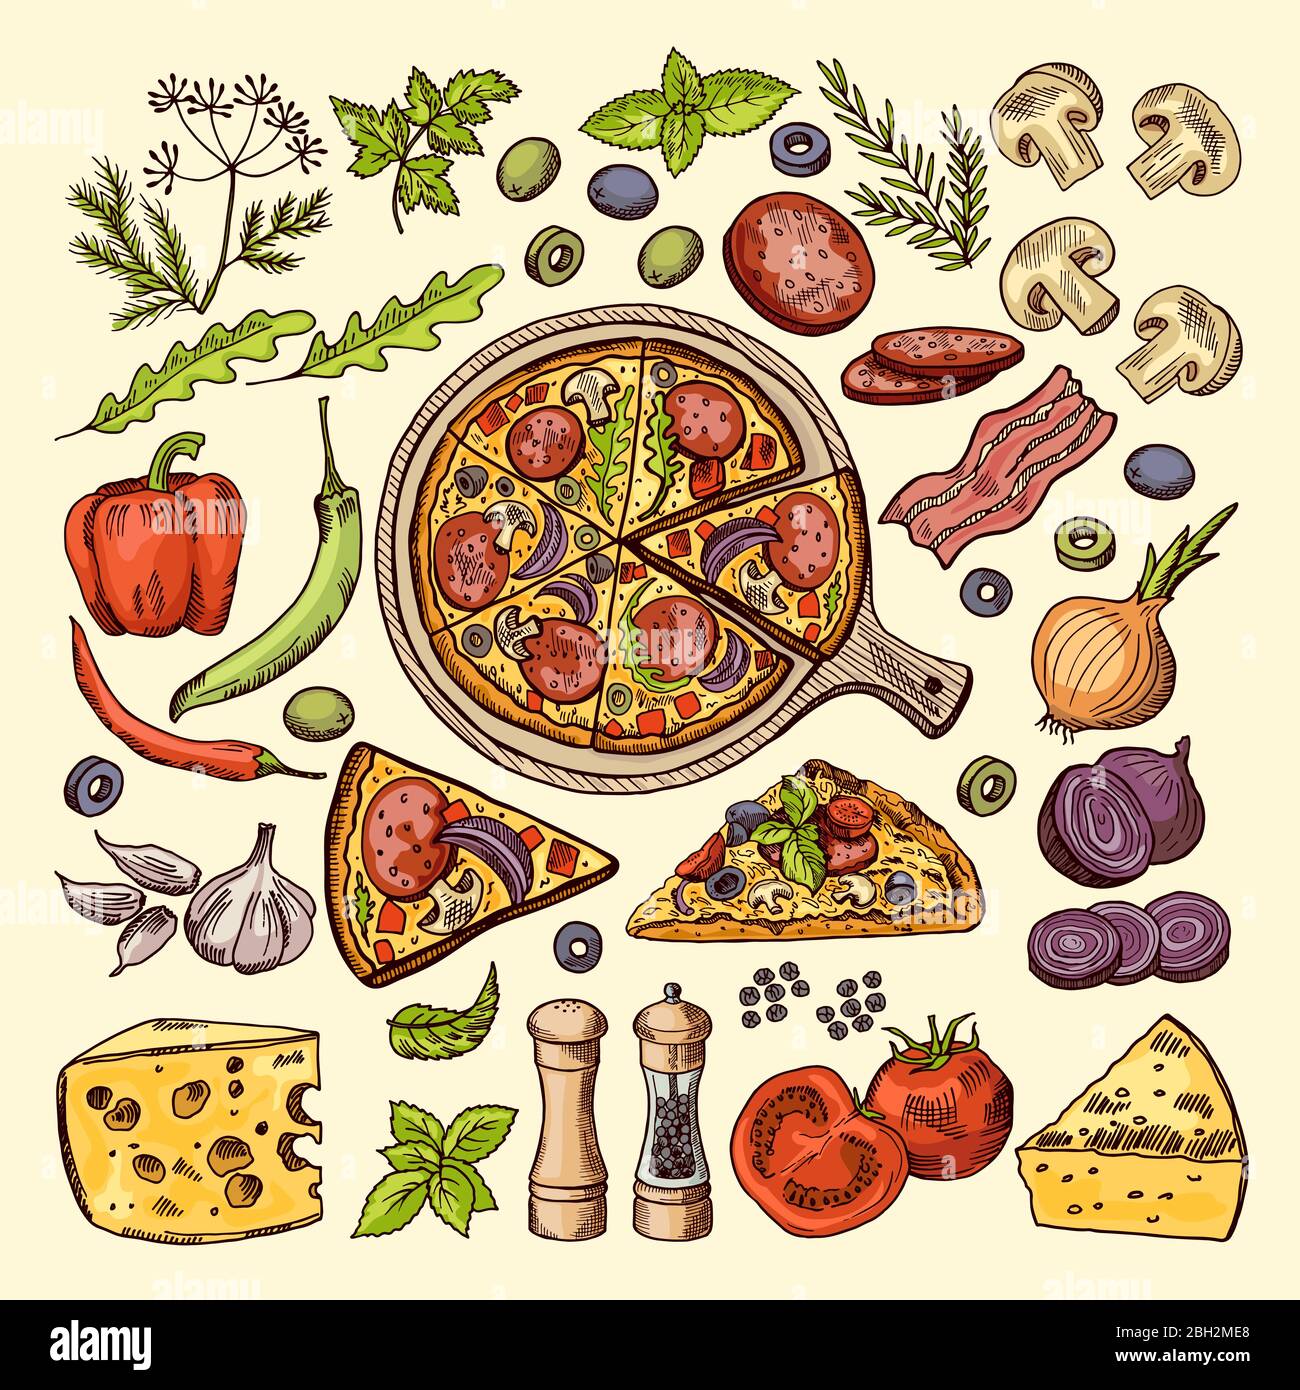 Slices of pizza with cheeses, olives and other ingredients. Vector hand drawn illustrations italian pizza ingredient, vegetable mushroom and garlic Stock Vector